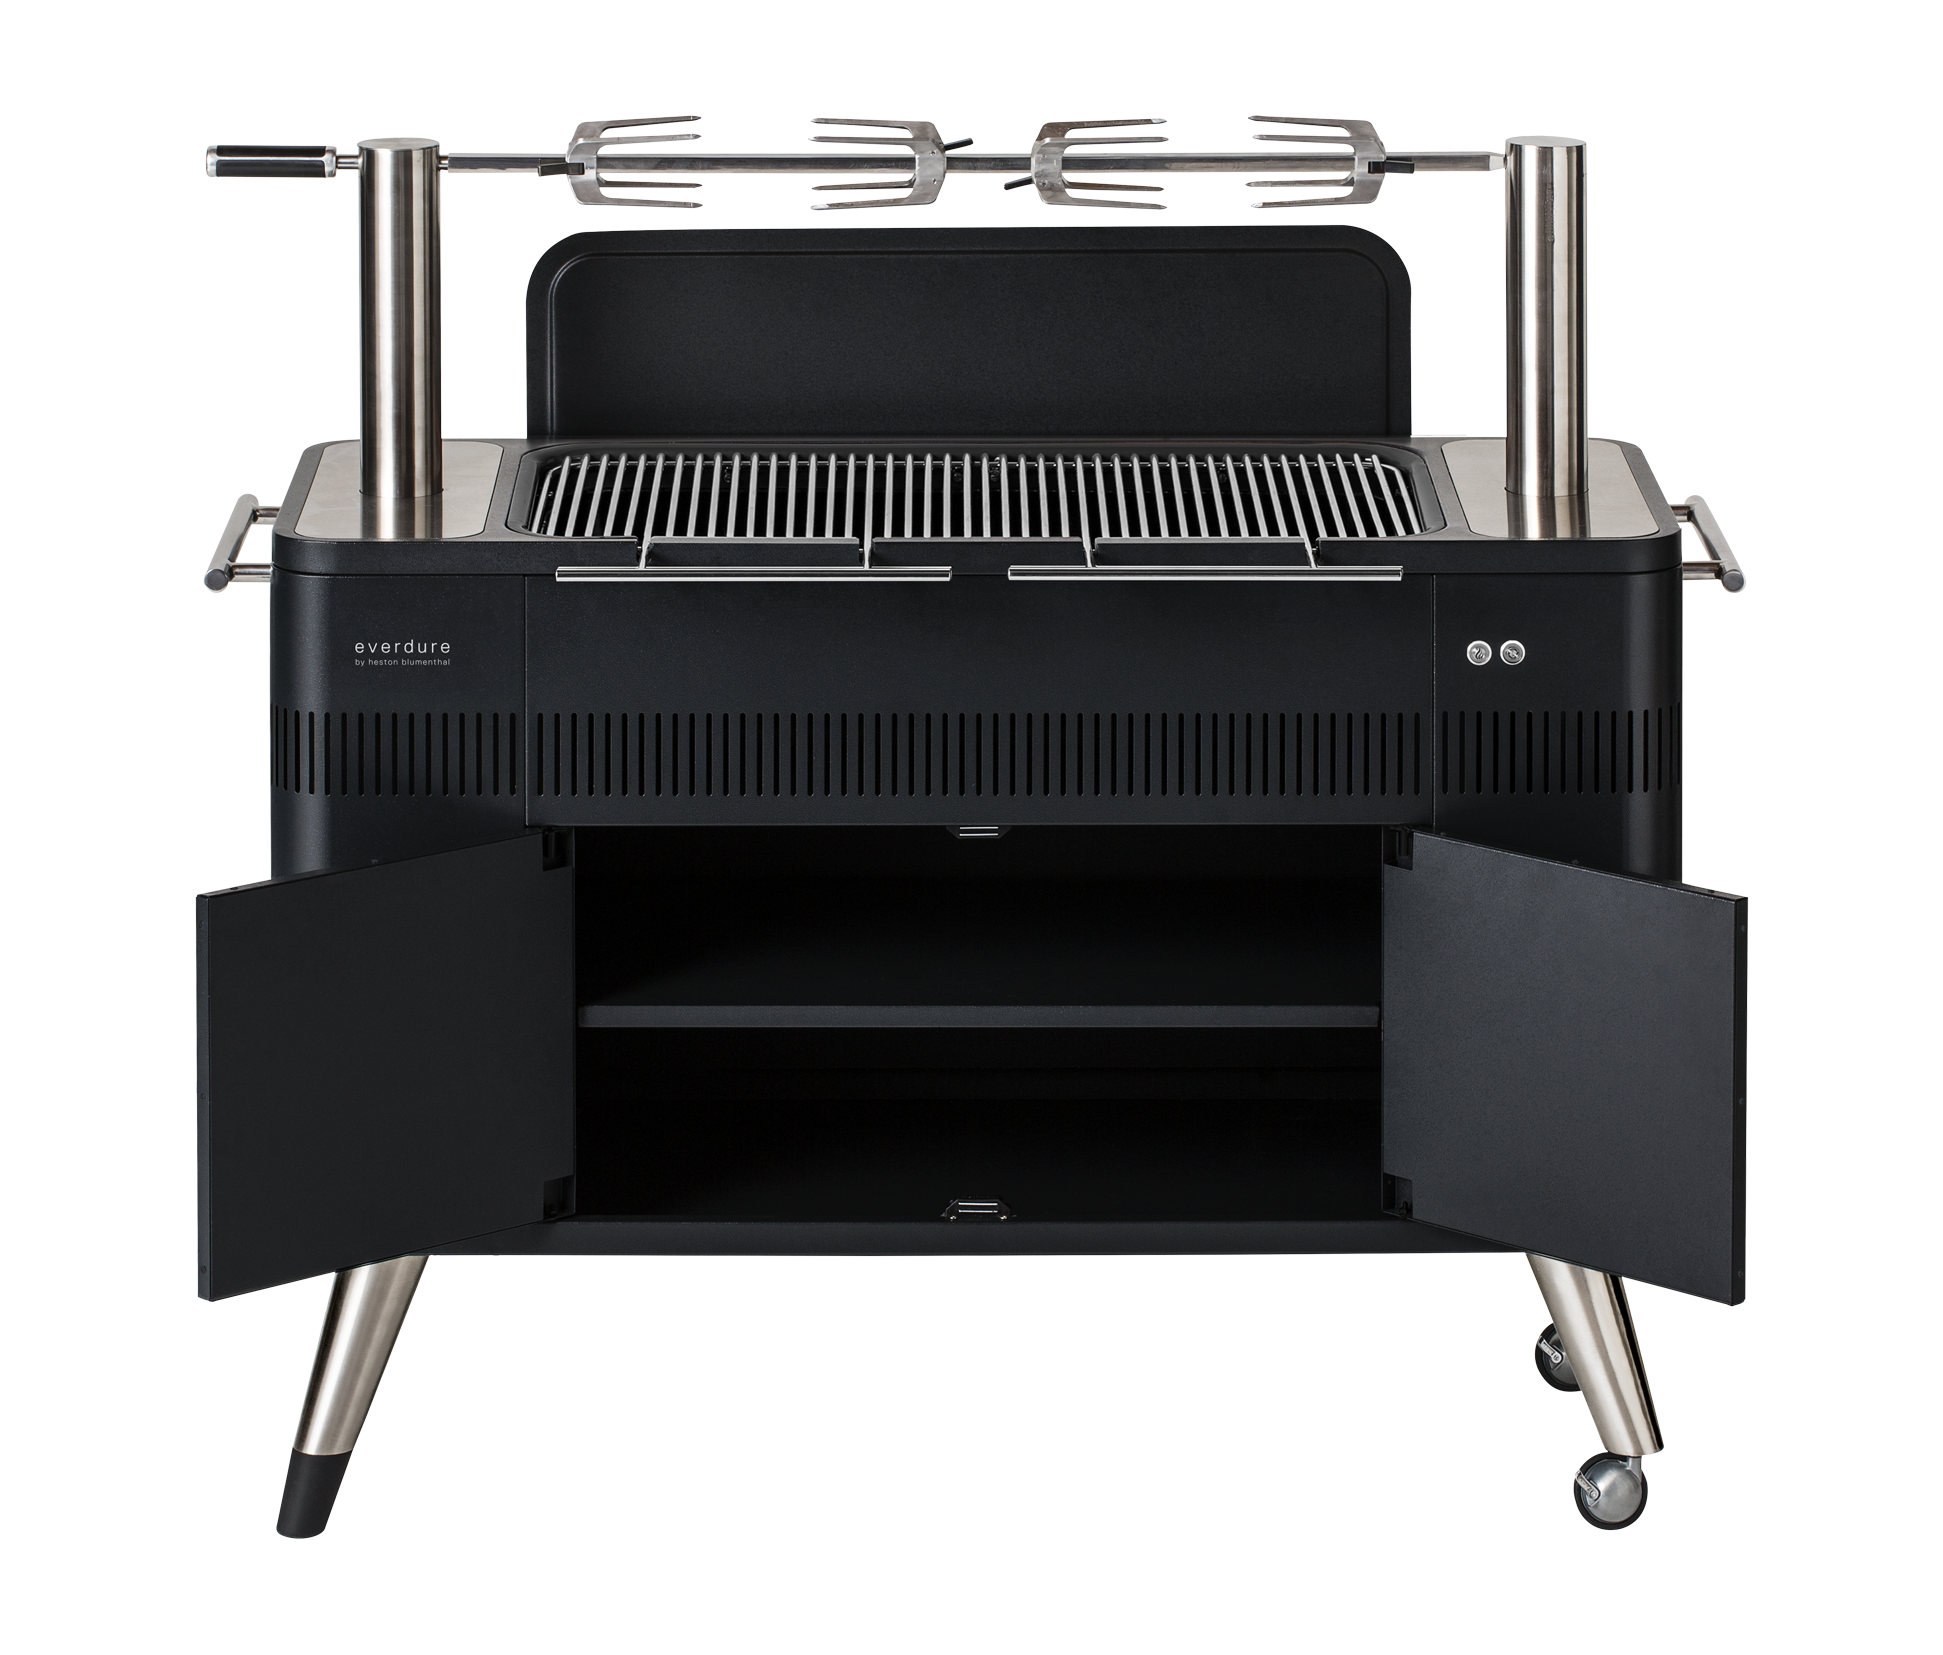 Everdure By Heston Blumenthal HUB I 54-Inch Charcoal Grill W/ Rotisserie & Electronic Ignition - Matte Black - HBCE2BBUS